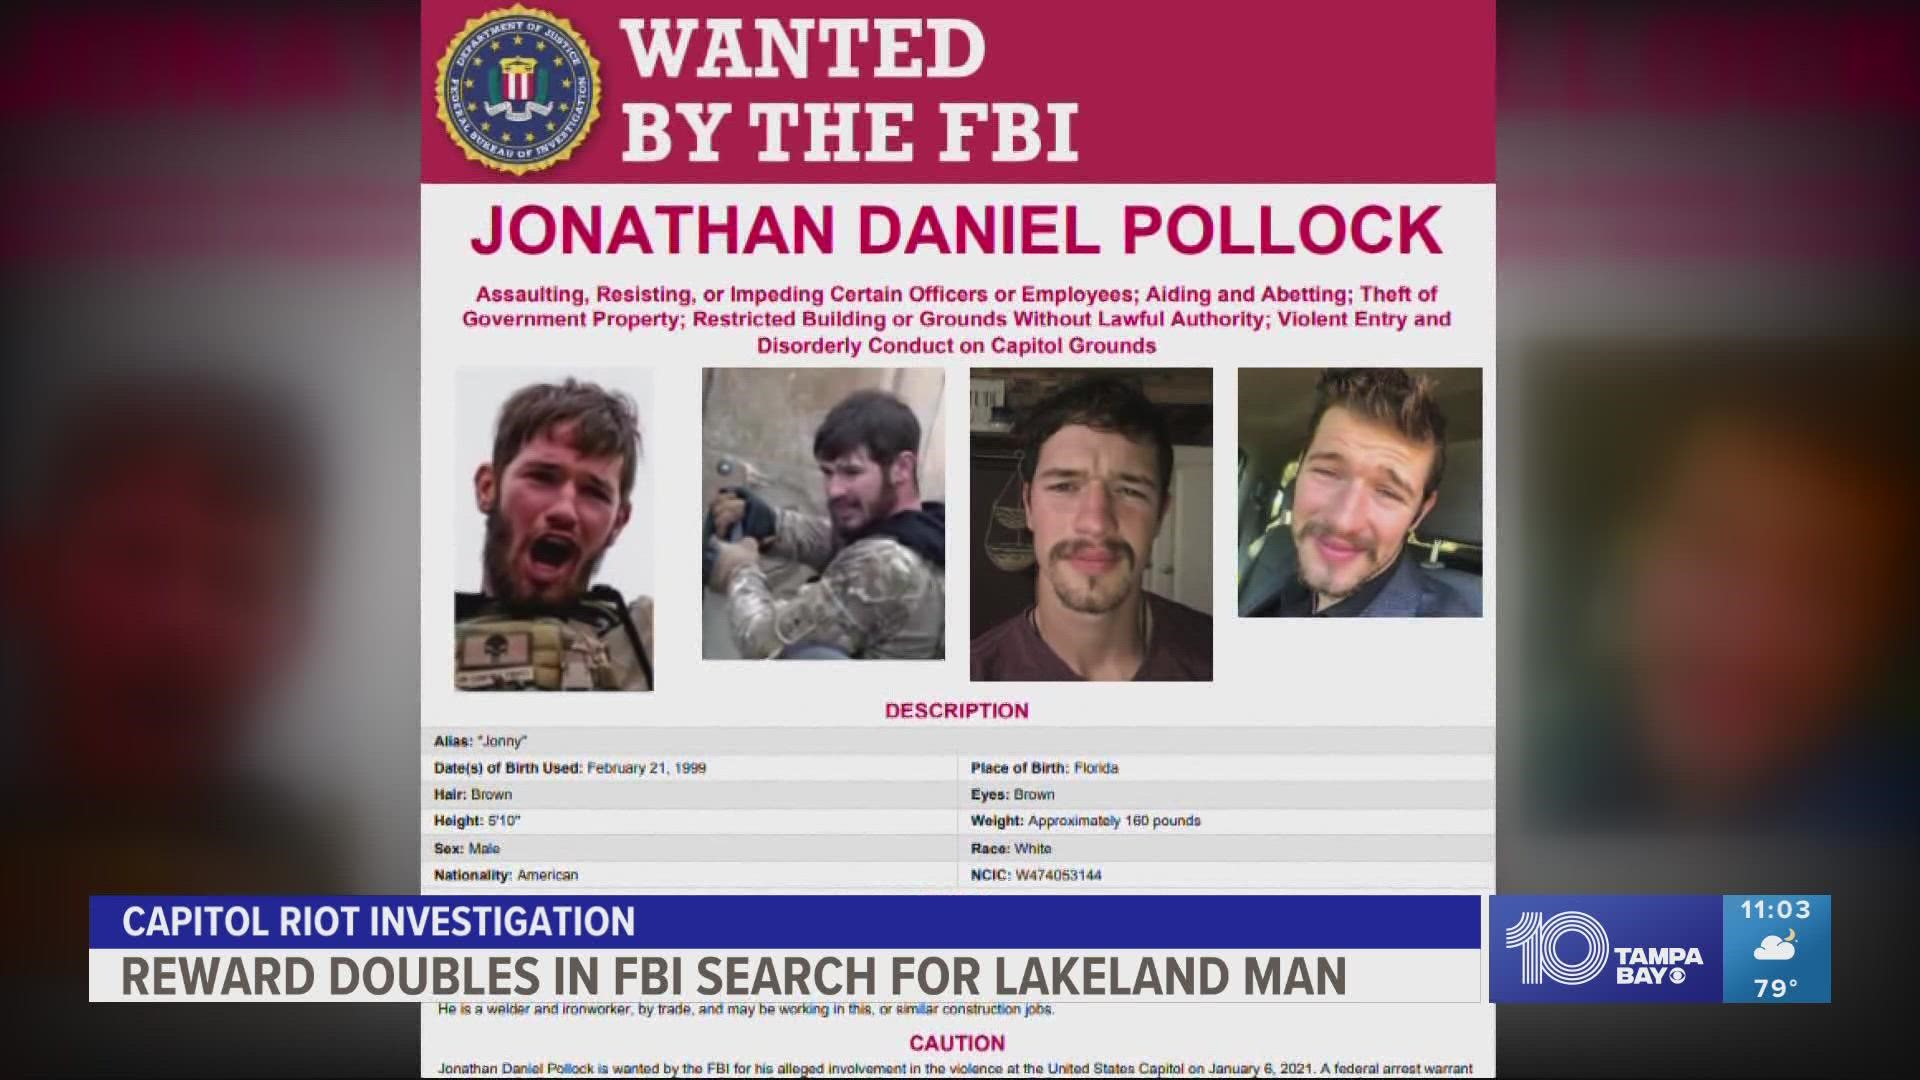 Jonathan Pollock, of Lakeland, attacked multiple police officers with a deadly weapon during the Jan. 6, 2021 attack on the U.S. Capitol, according to the FBI.